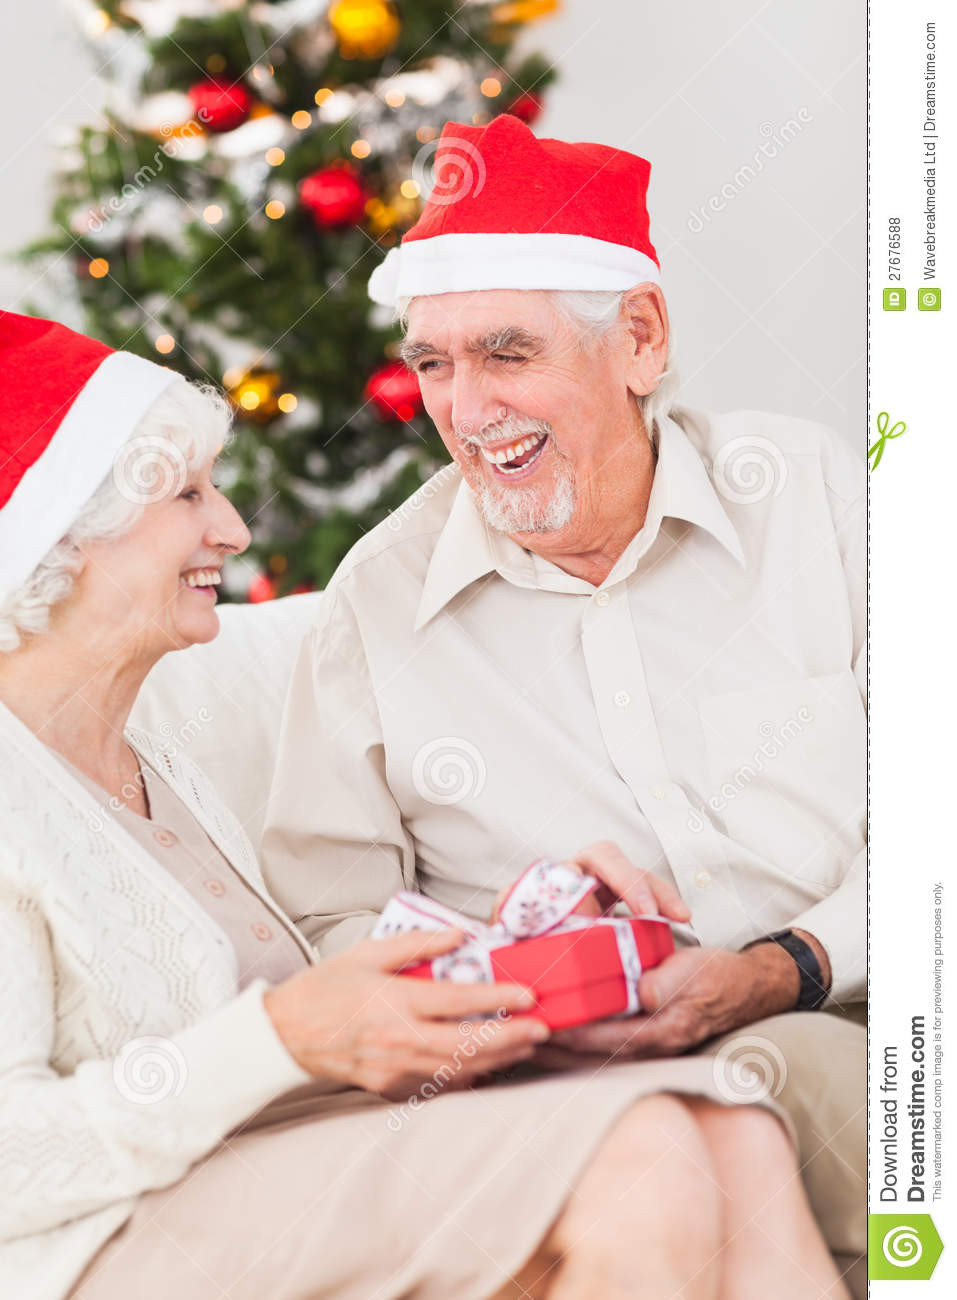 Christmas Gift Ideas For Older Couple
 Elderly Couple Exchanging Christmas Gifts Stock